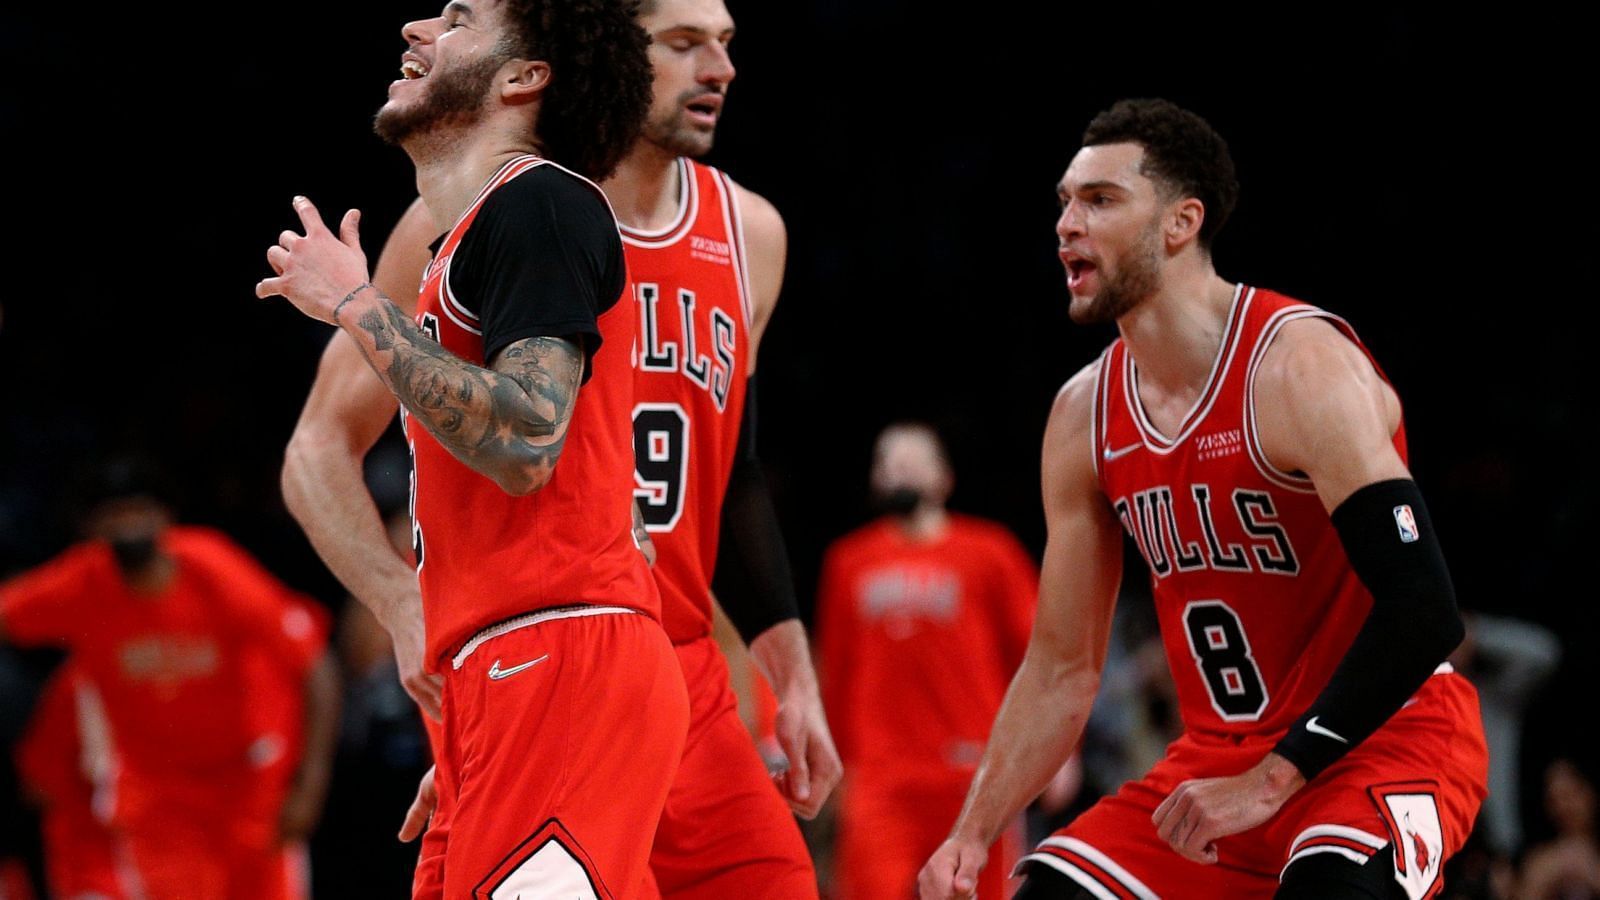 The Chicago Bulls in action in the NBA.